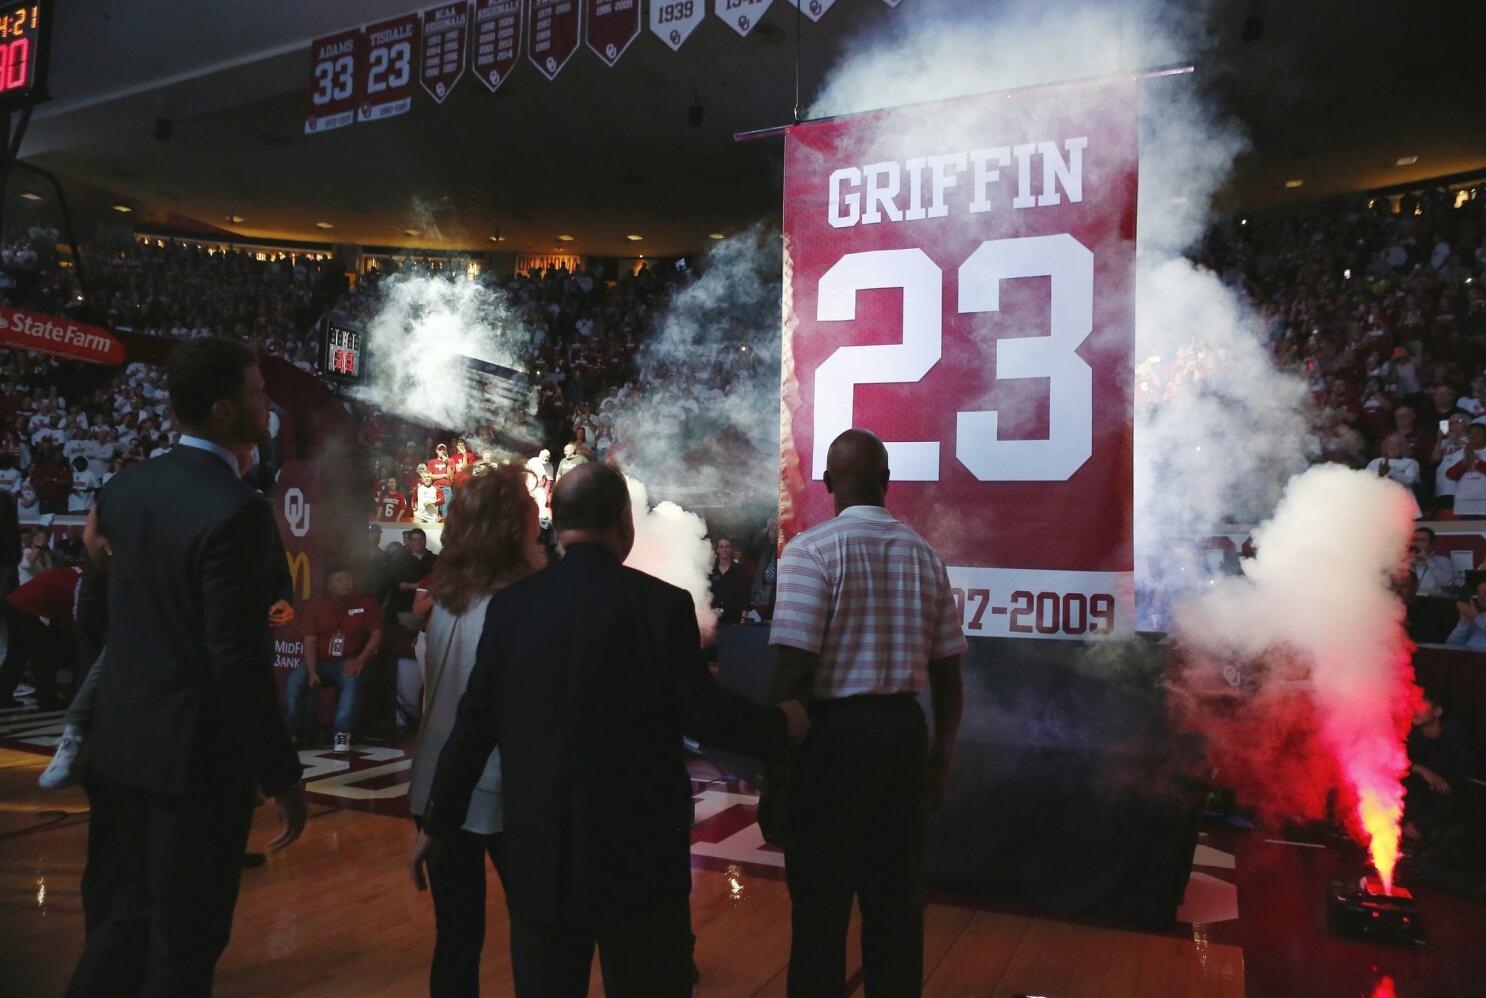 Oklahoma Sooners retire Blake Griffin's jersey number - ESPN